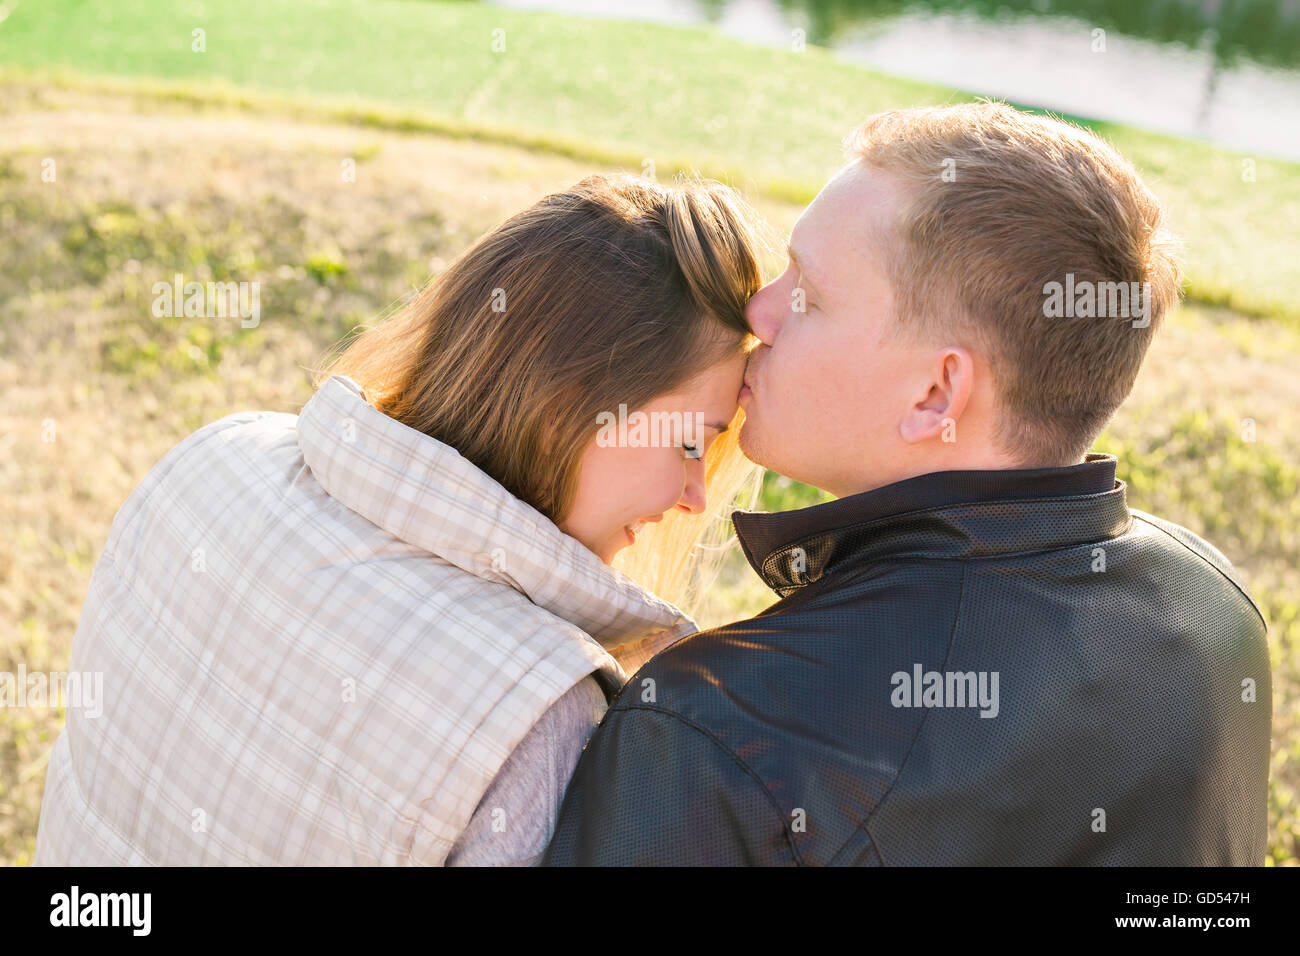 Romantic couple kissing in nature · Free Stock Photo